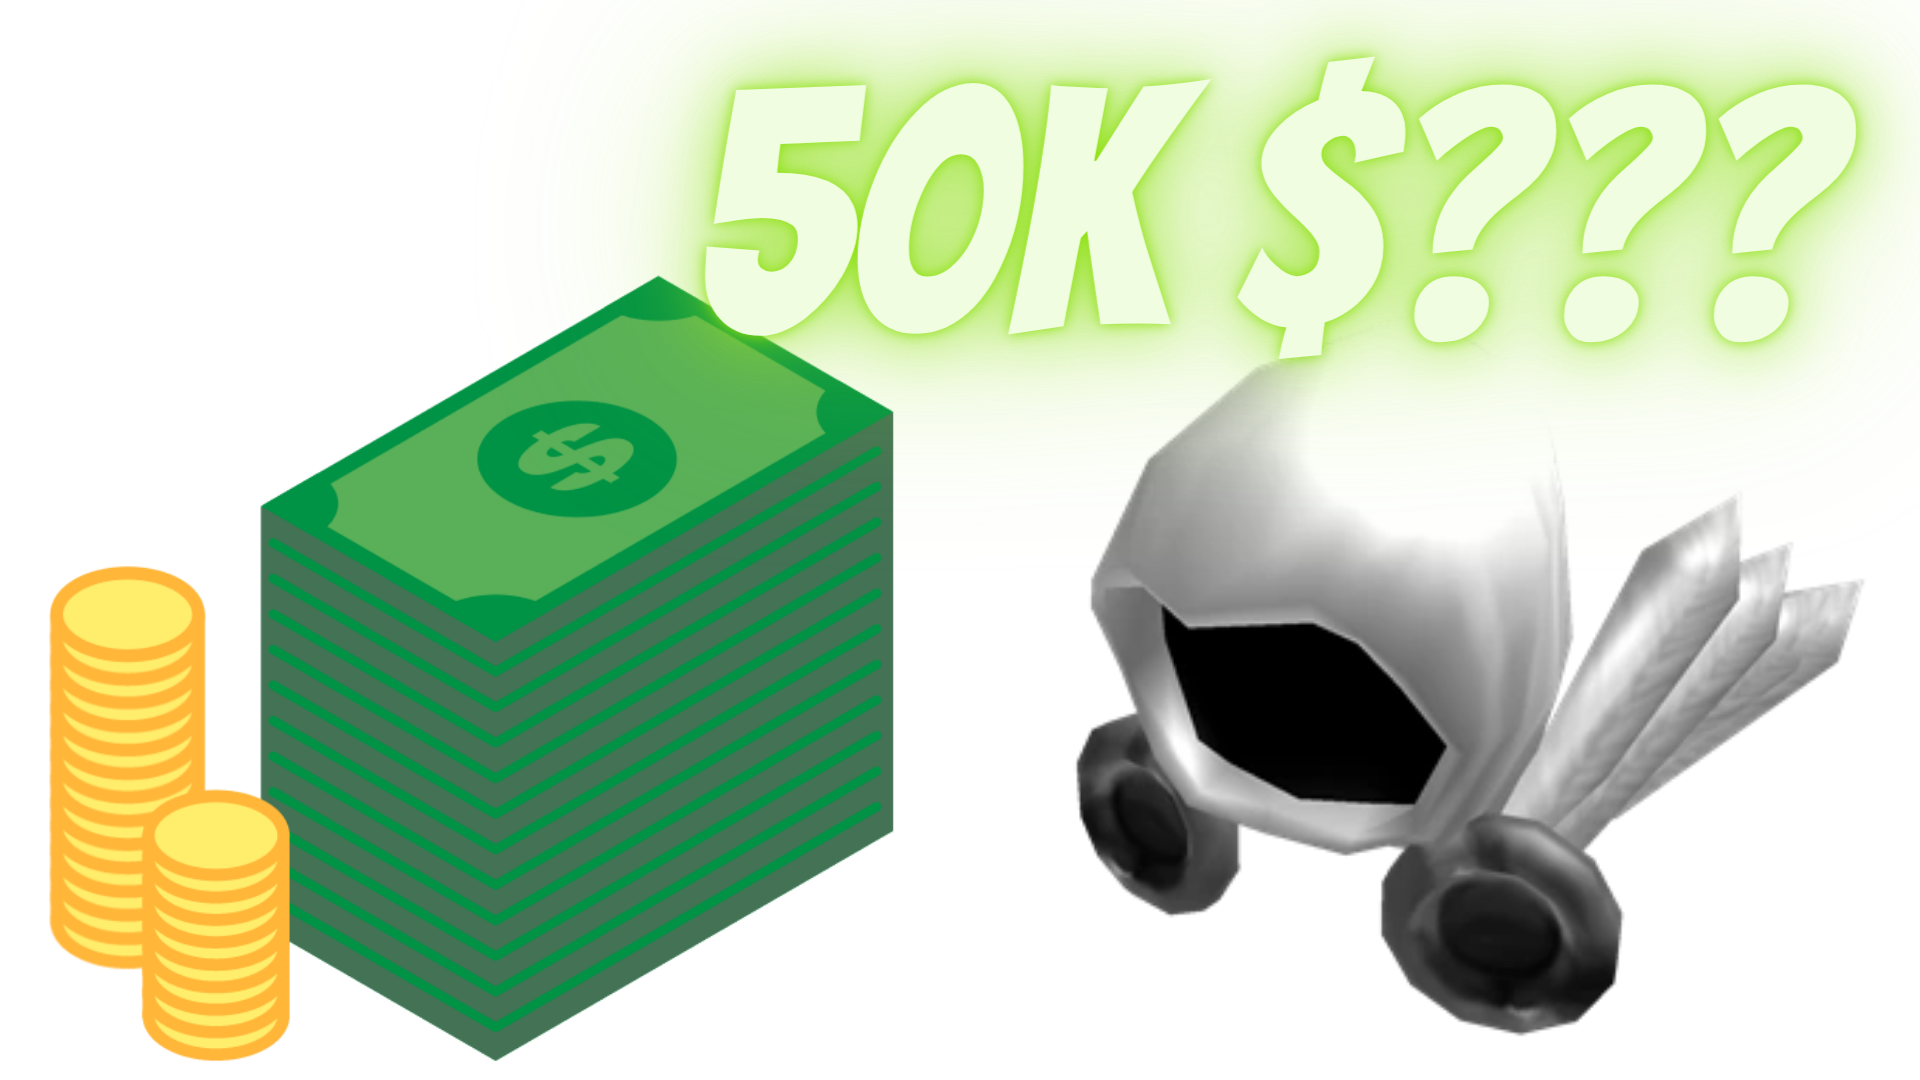 HOW MUCH ROBLOX ITEMS COST IN REAL MONEY!! *EXPENSIVE* 